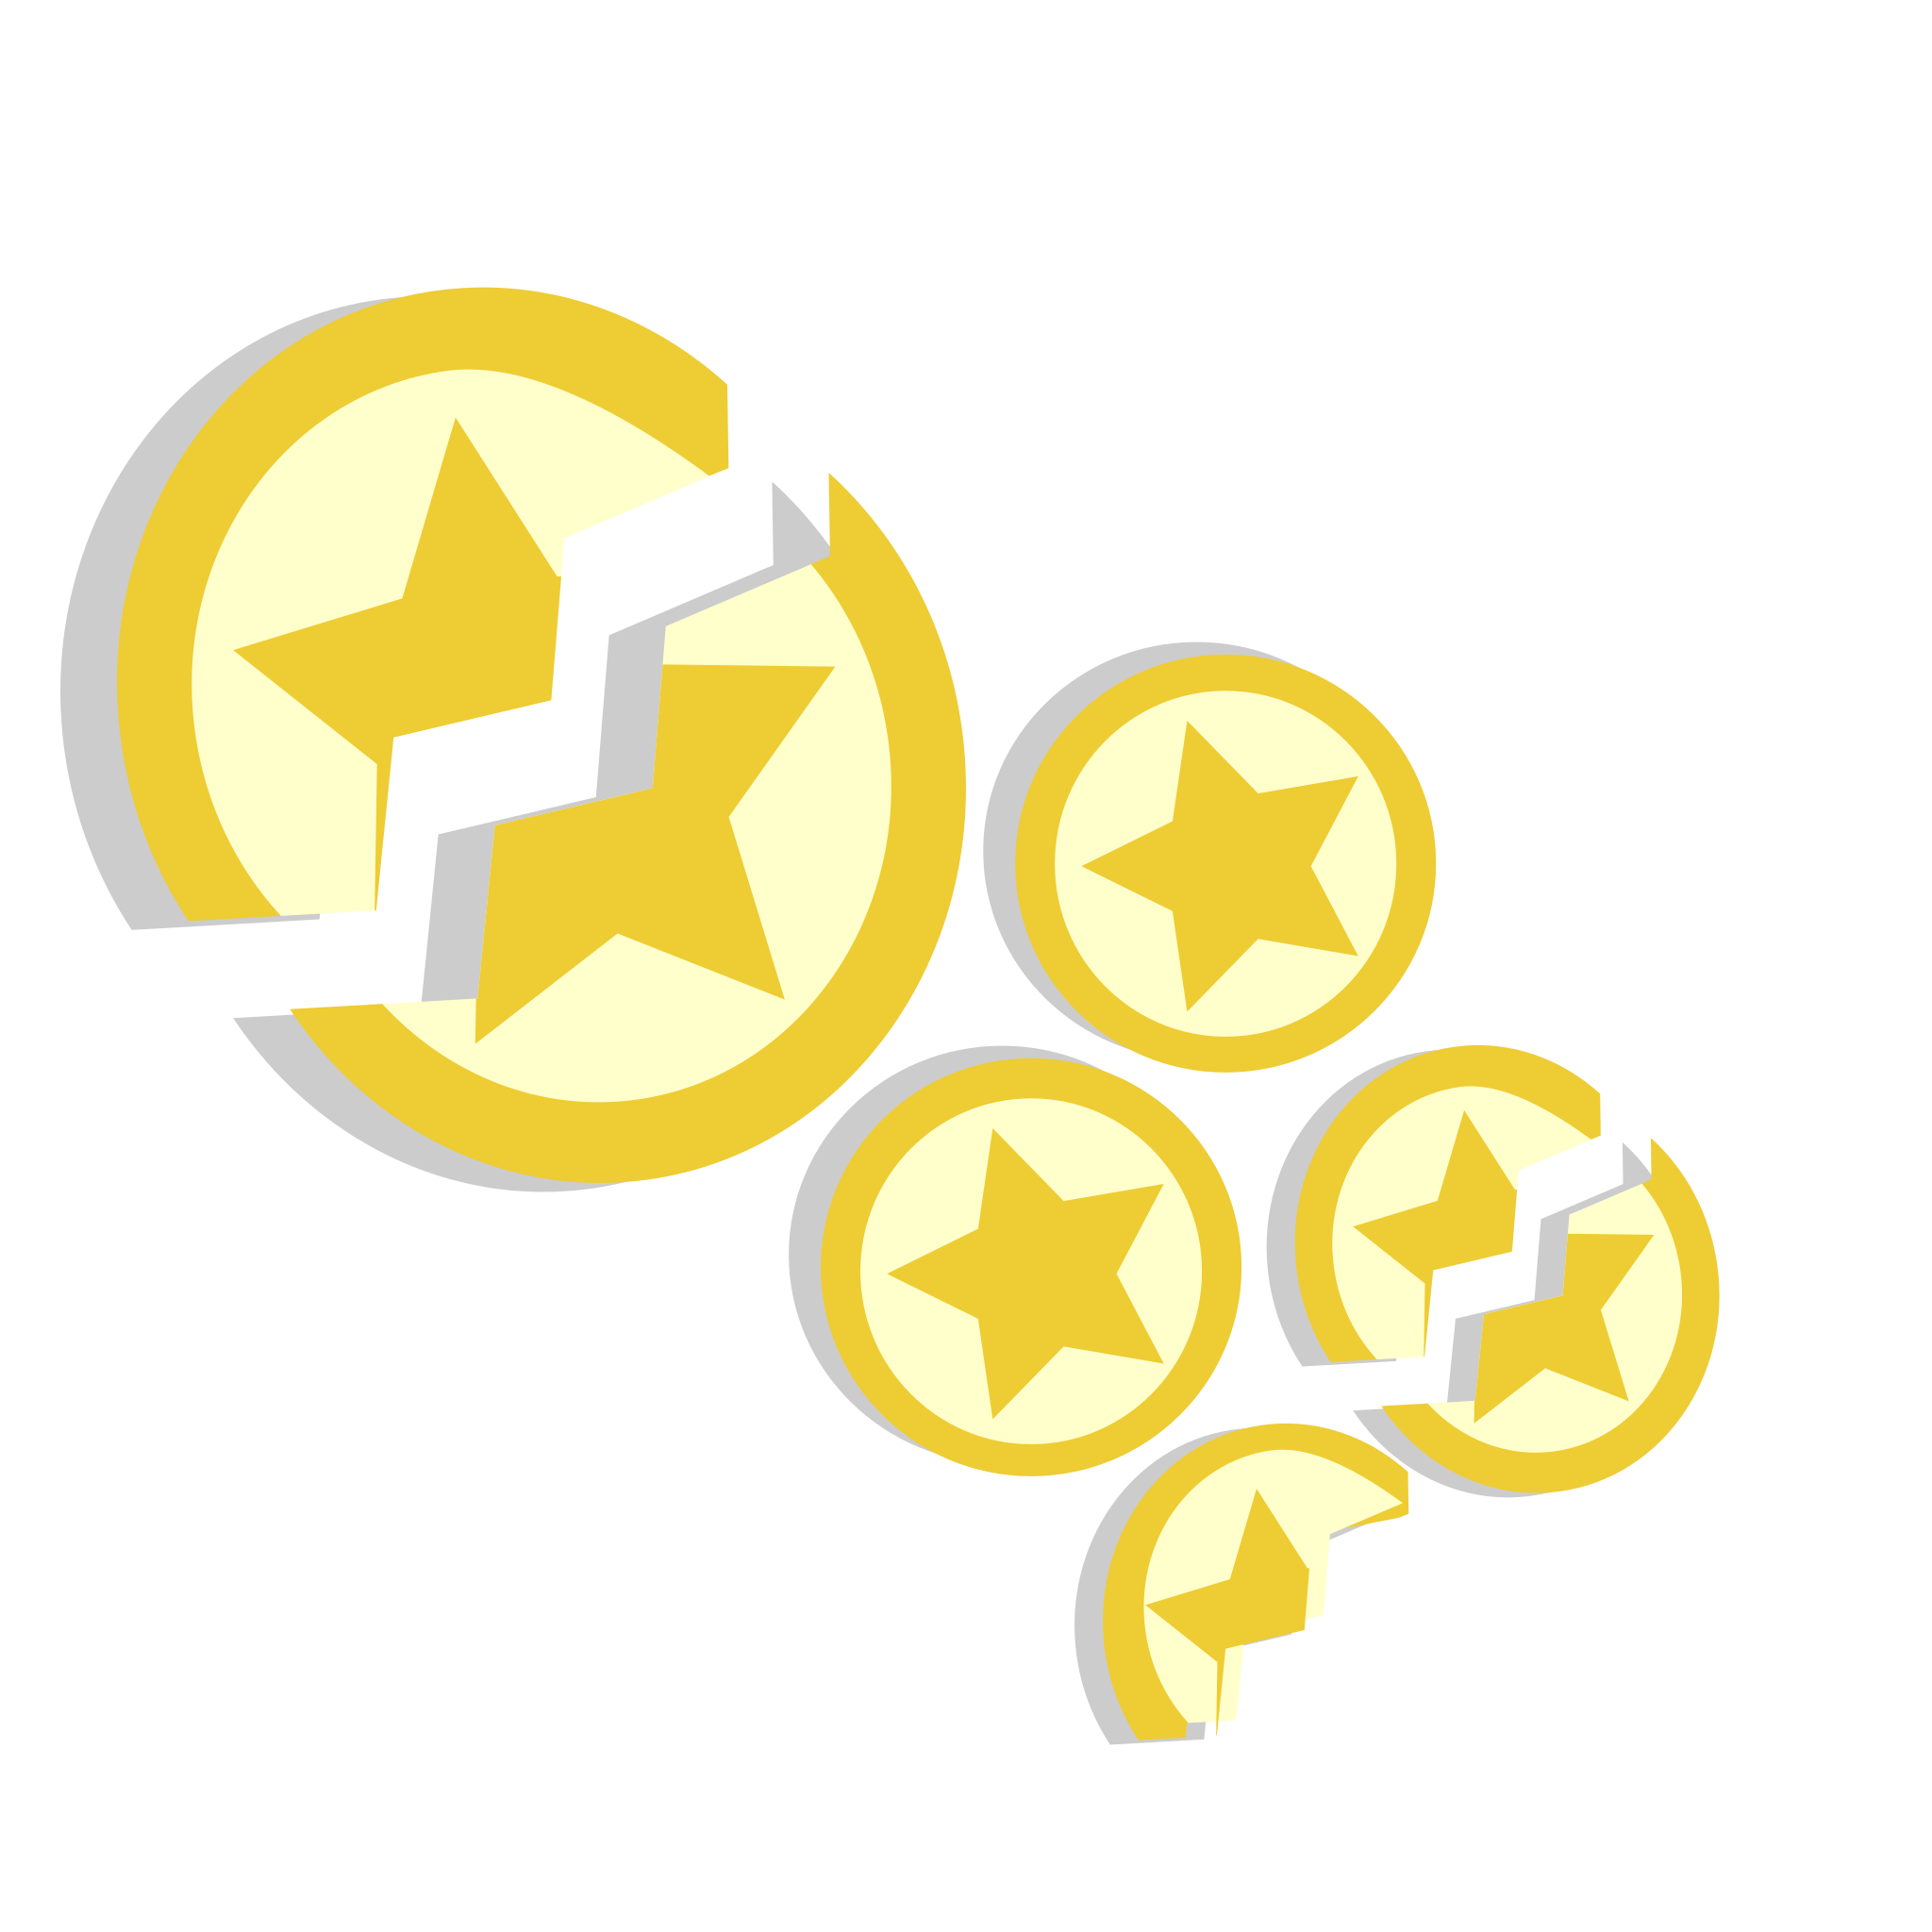 File:Gold Star.svg - Wikimedia Commons